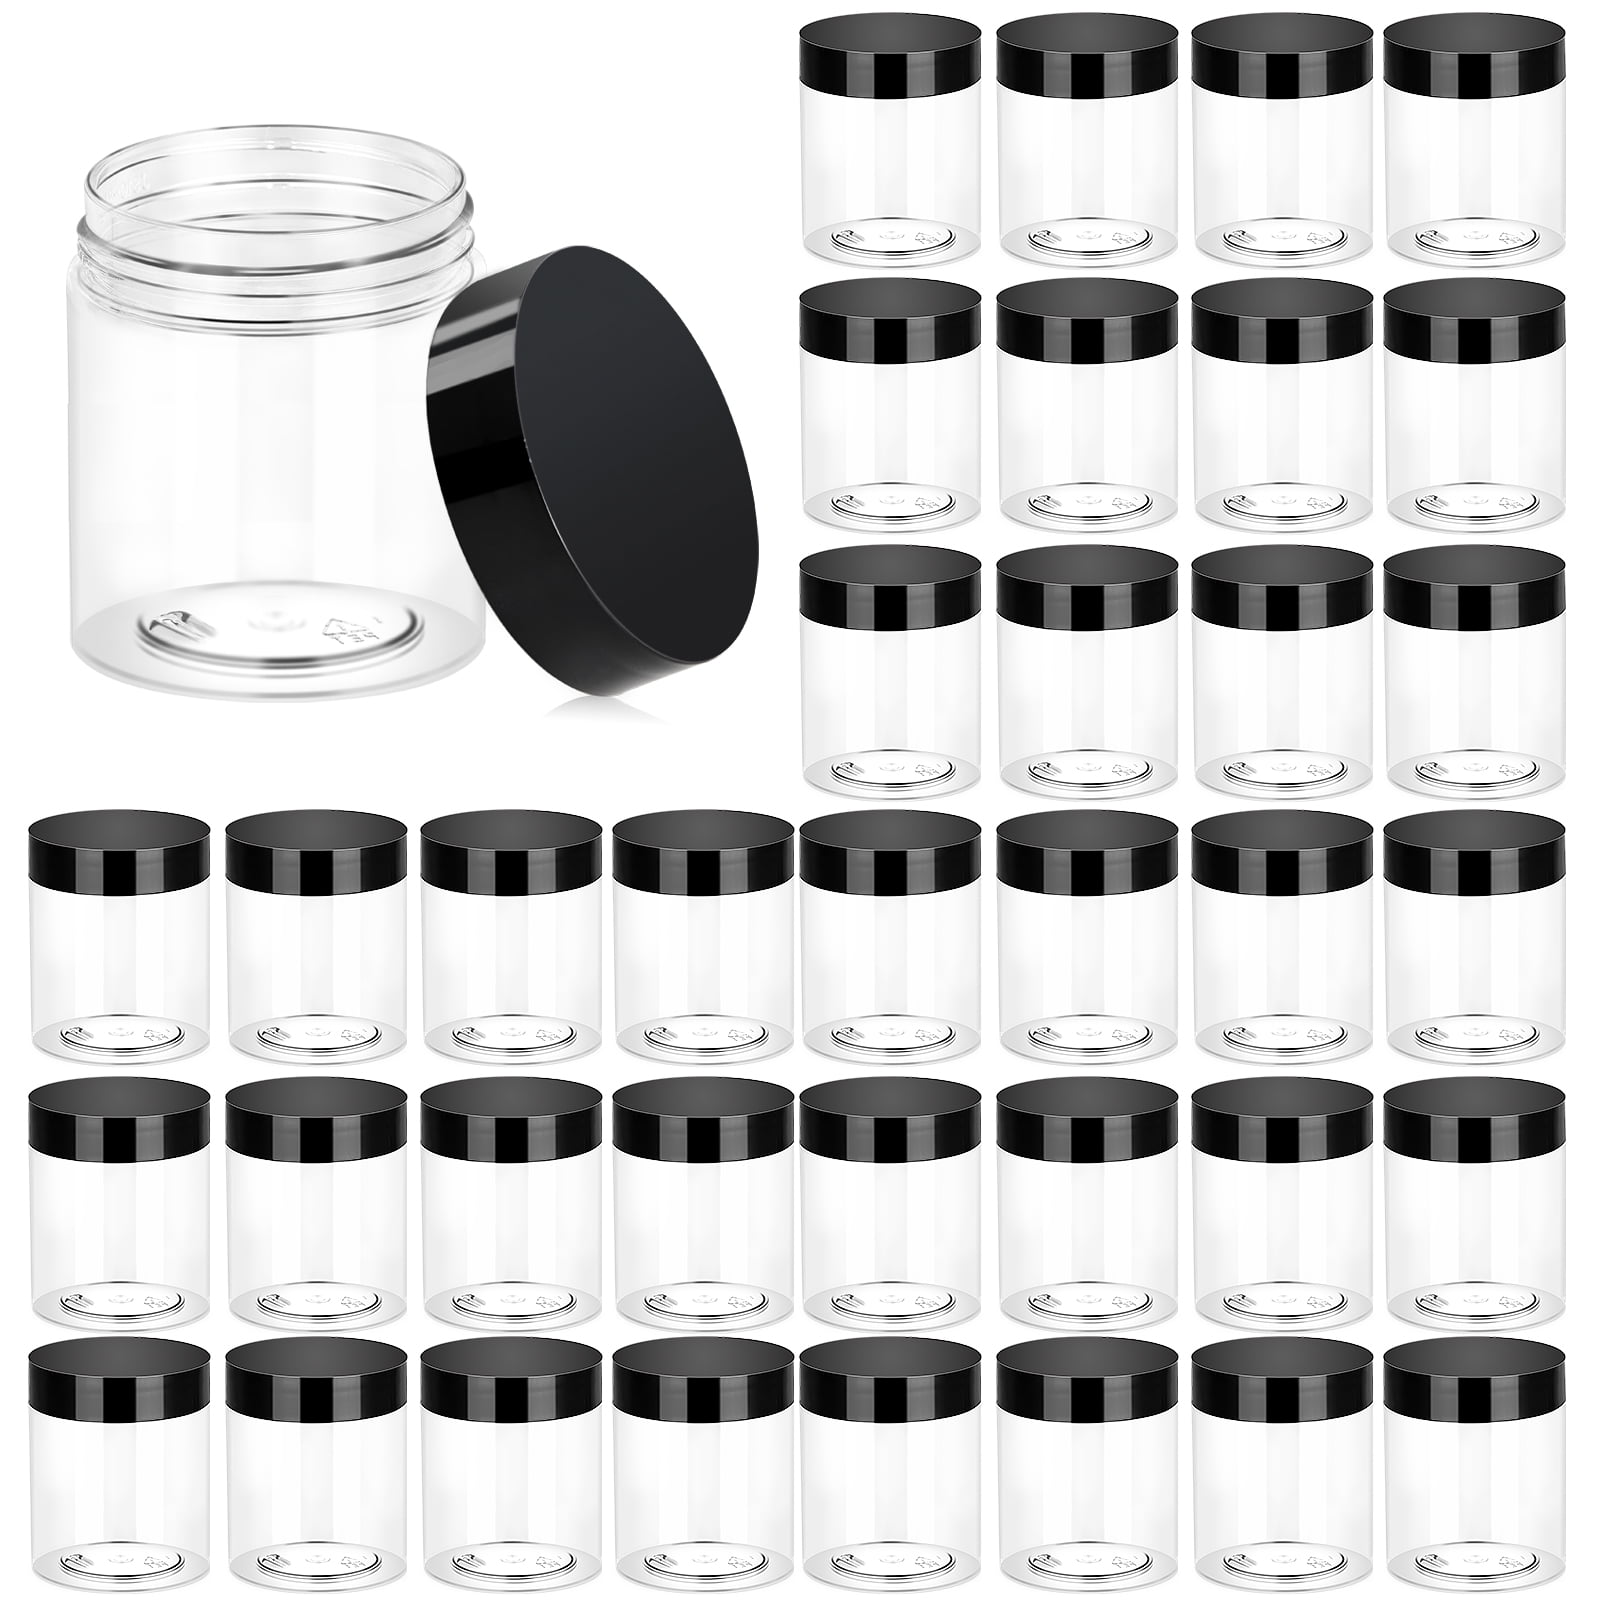 Habbi 24 Pack 8oz Slime Containers with Lids Plastic Jars Containers for Slime W